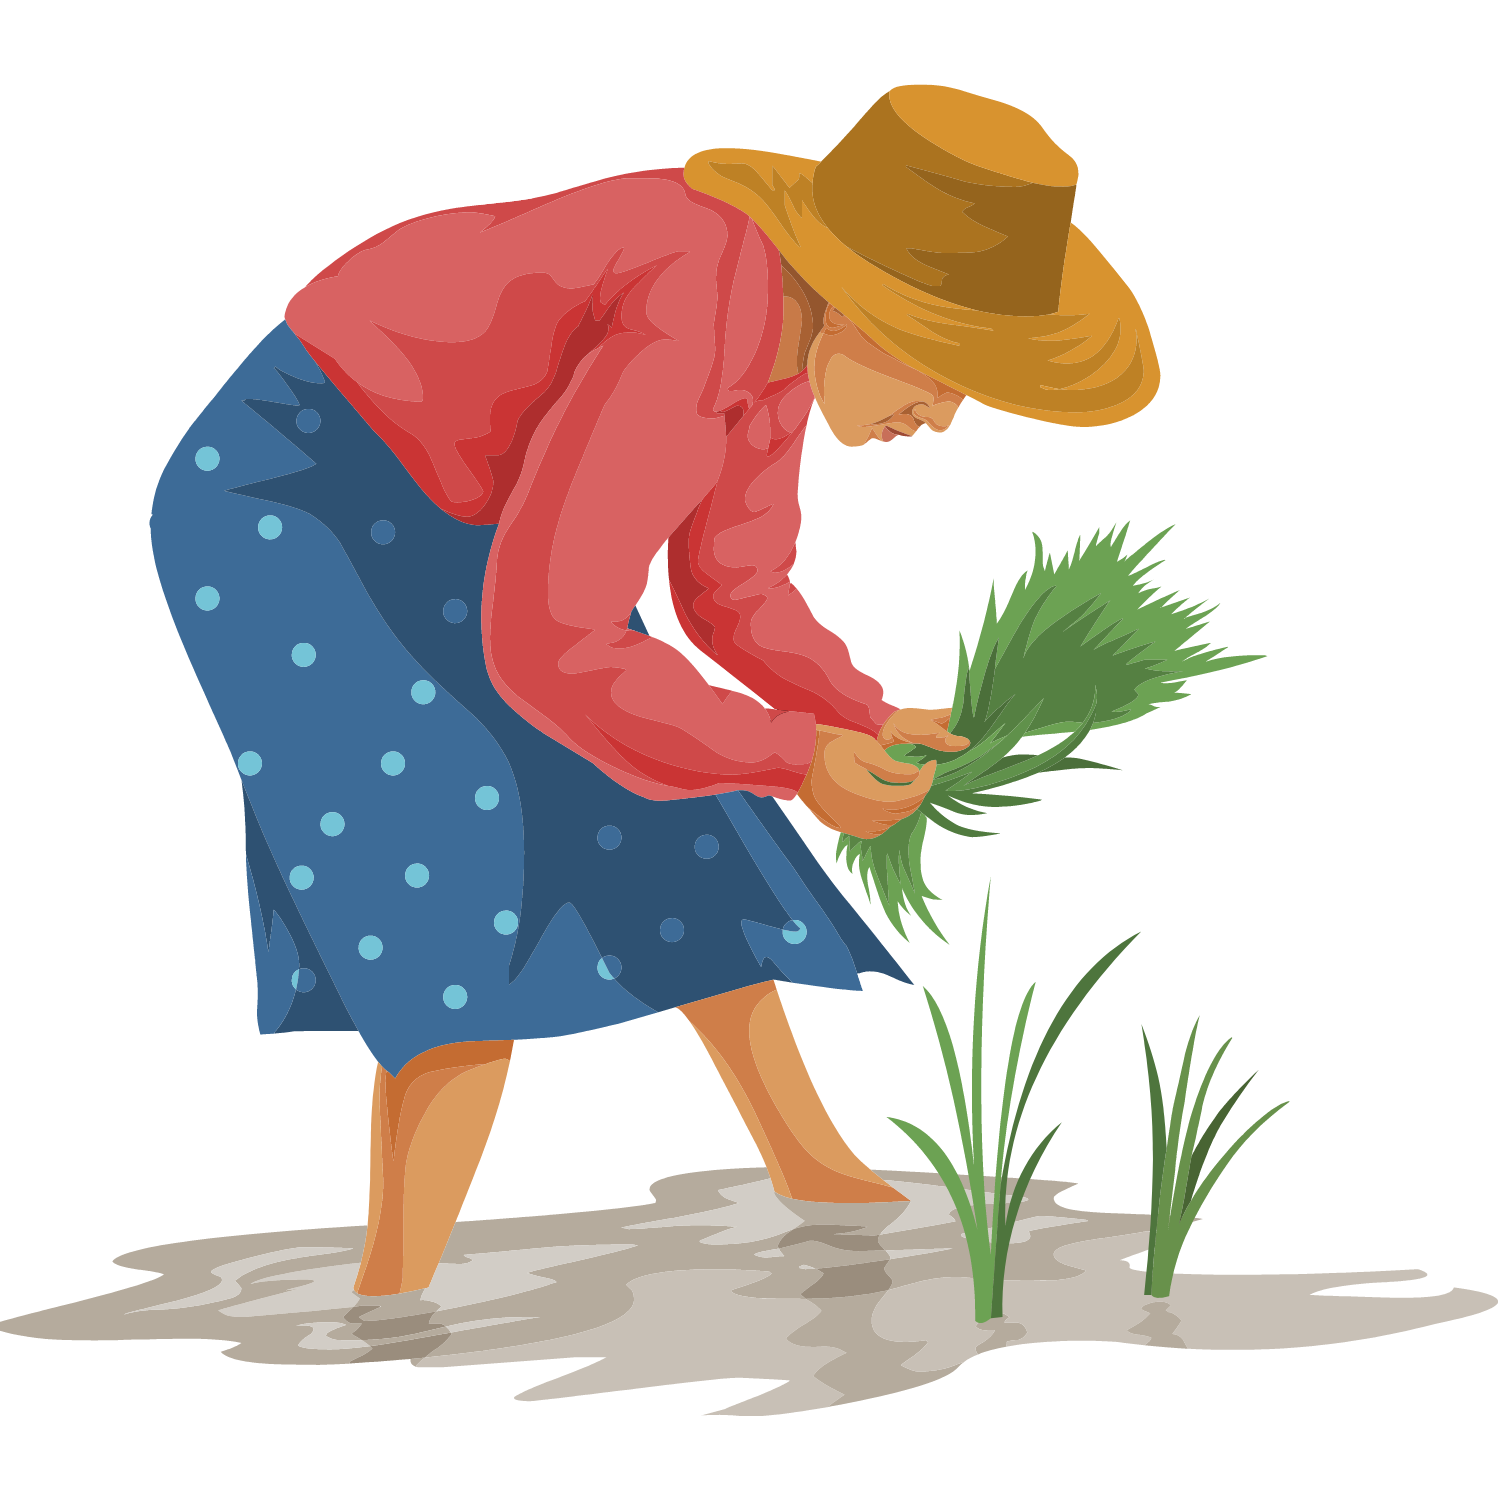 Illustration of a woman planting trees.